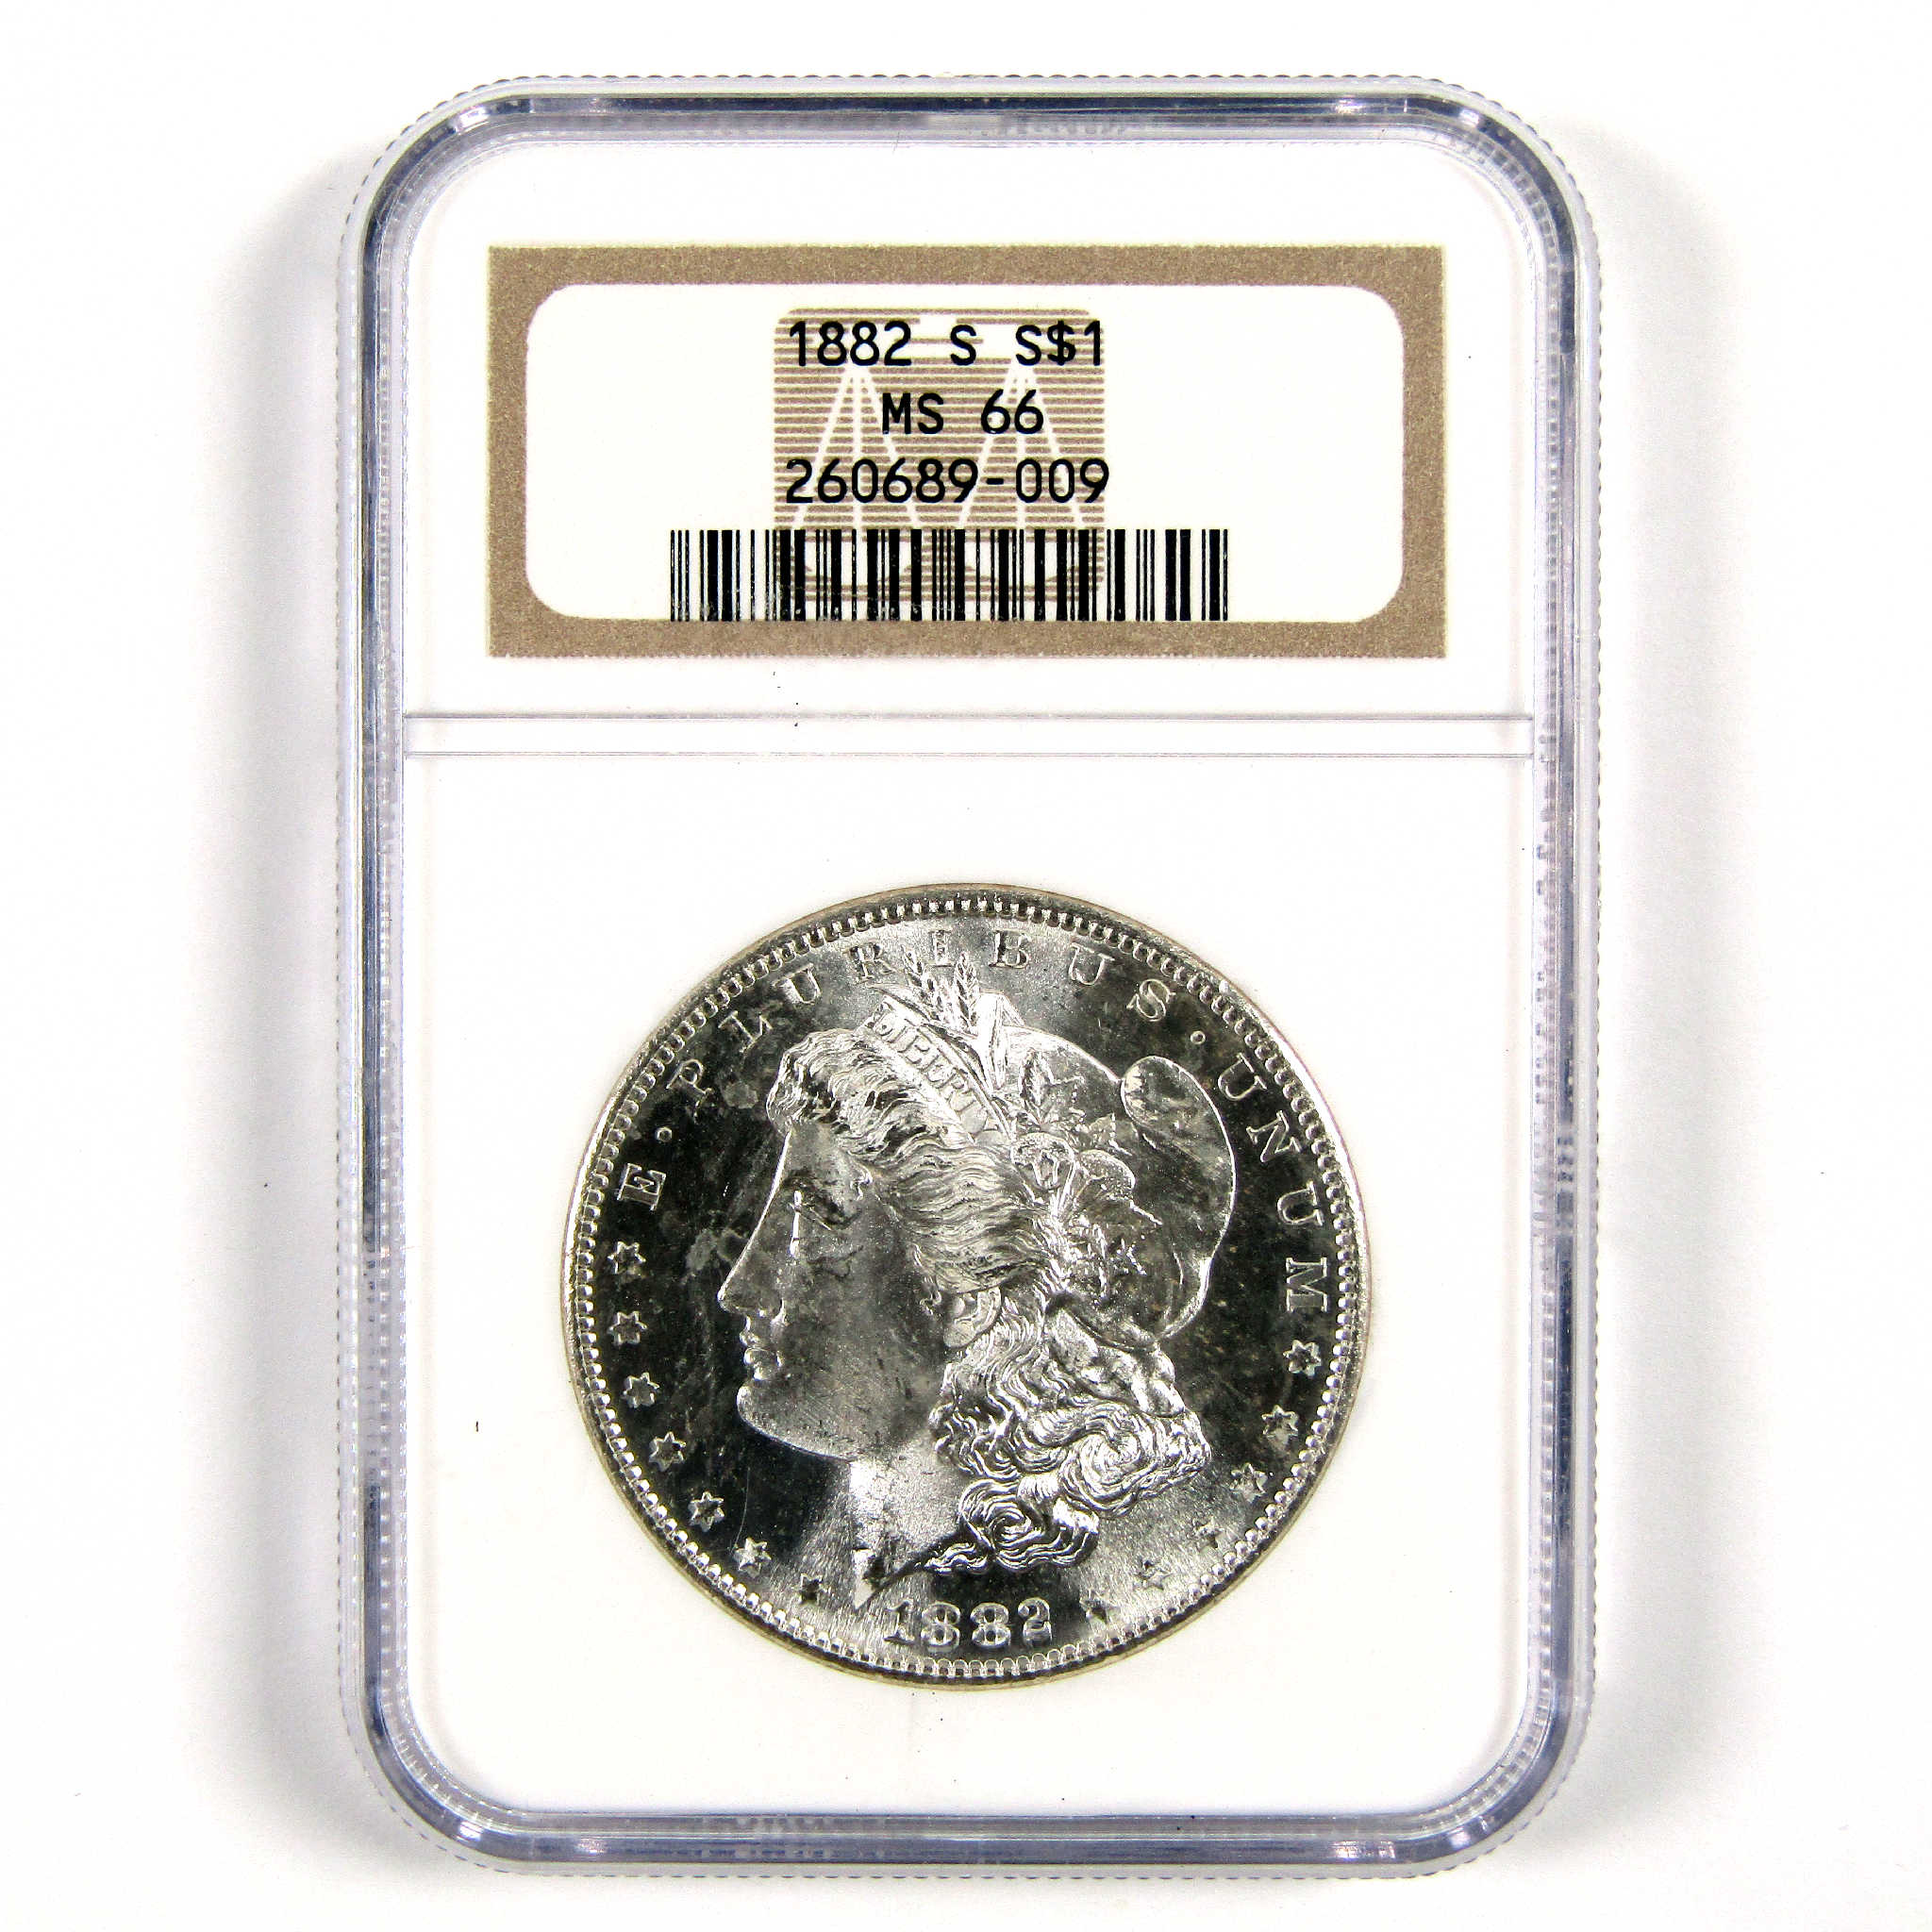 1882 S Morgan Dollar MS 66 NGC Silver $1 Uncirculated Coin SKU:CPC6238 - Morgan coin - Morgan silver dollar - Morgan silver dollar for sale - Profile Coins &amp; Collectibles